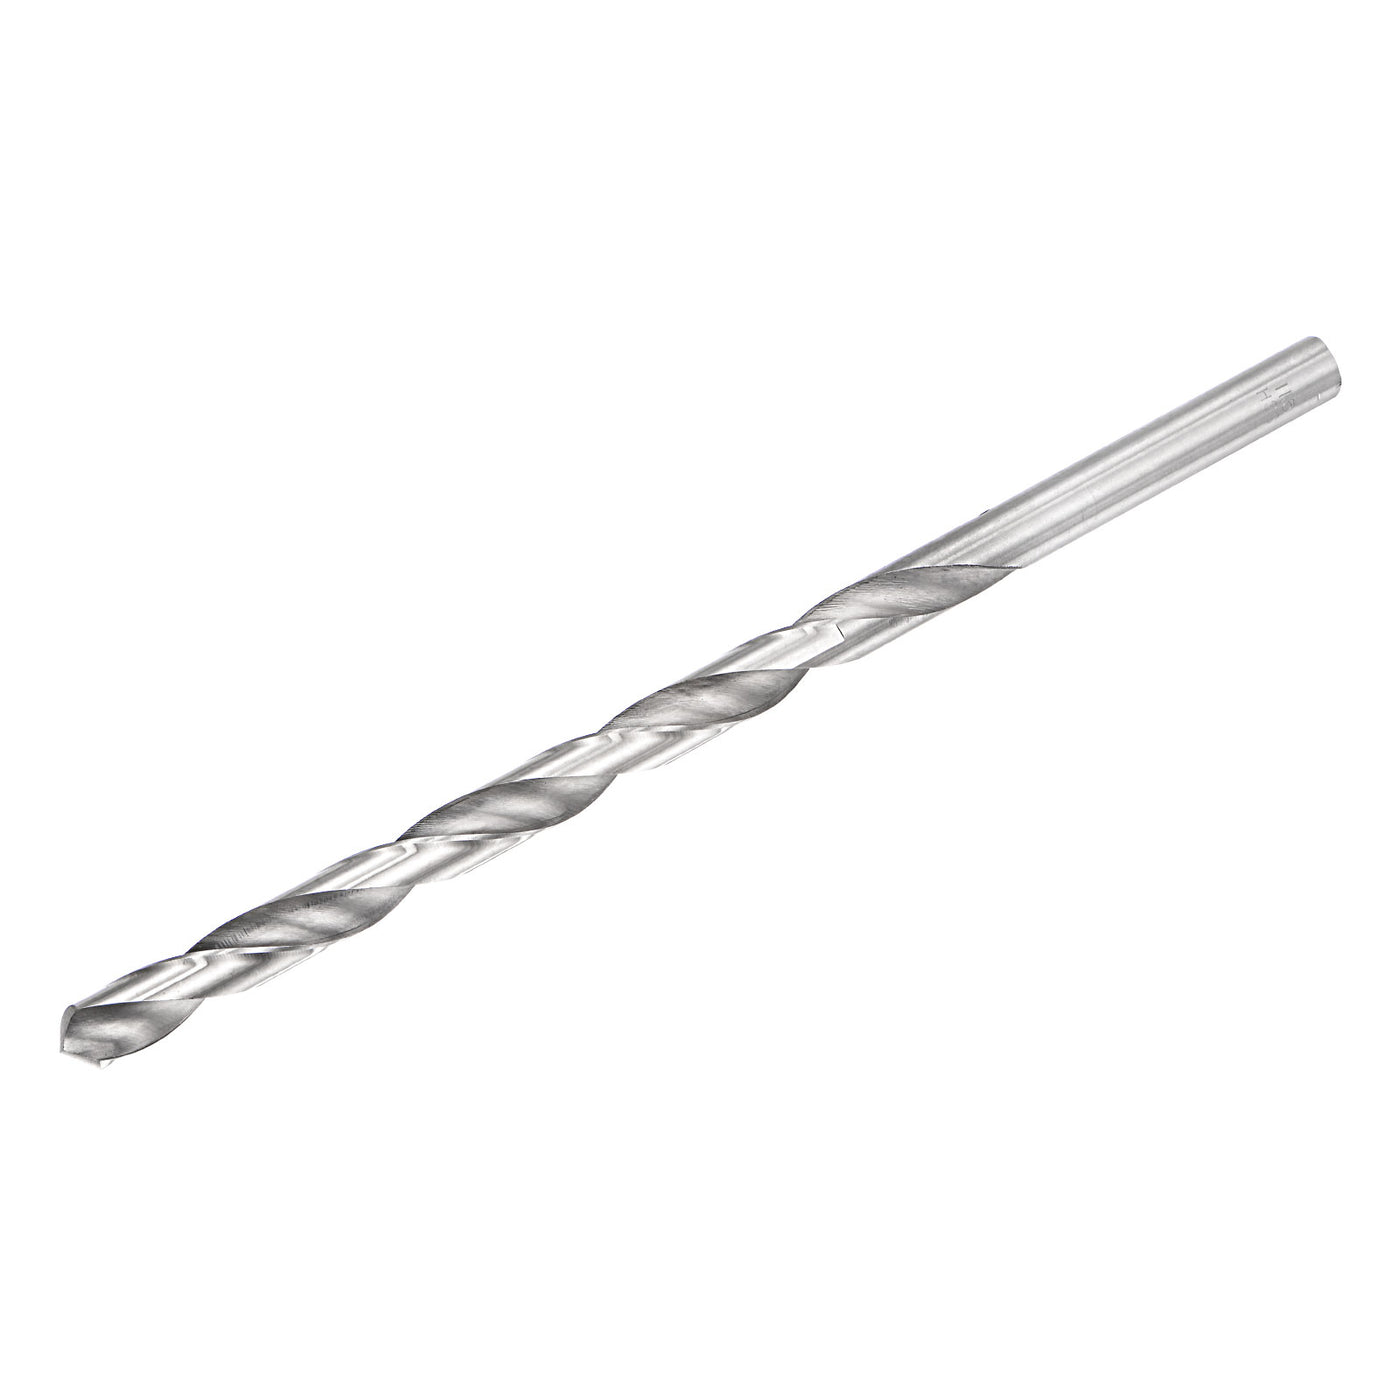 uxcell Uxcell 11.5mm Twist Drill Bits, High-Speed Steel Extra Long Drill Bit 255mm Length